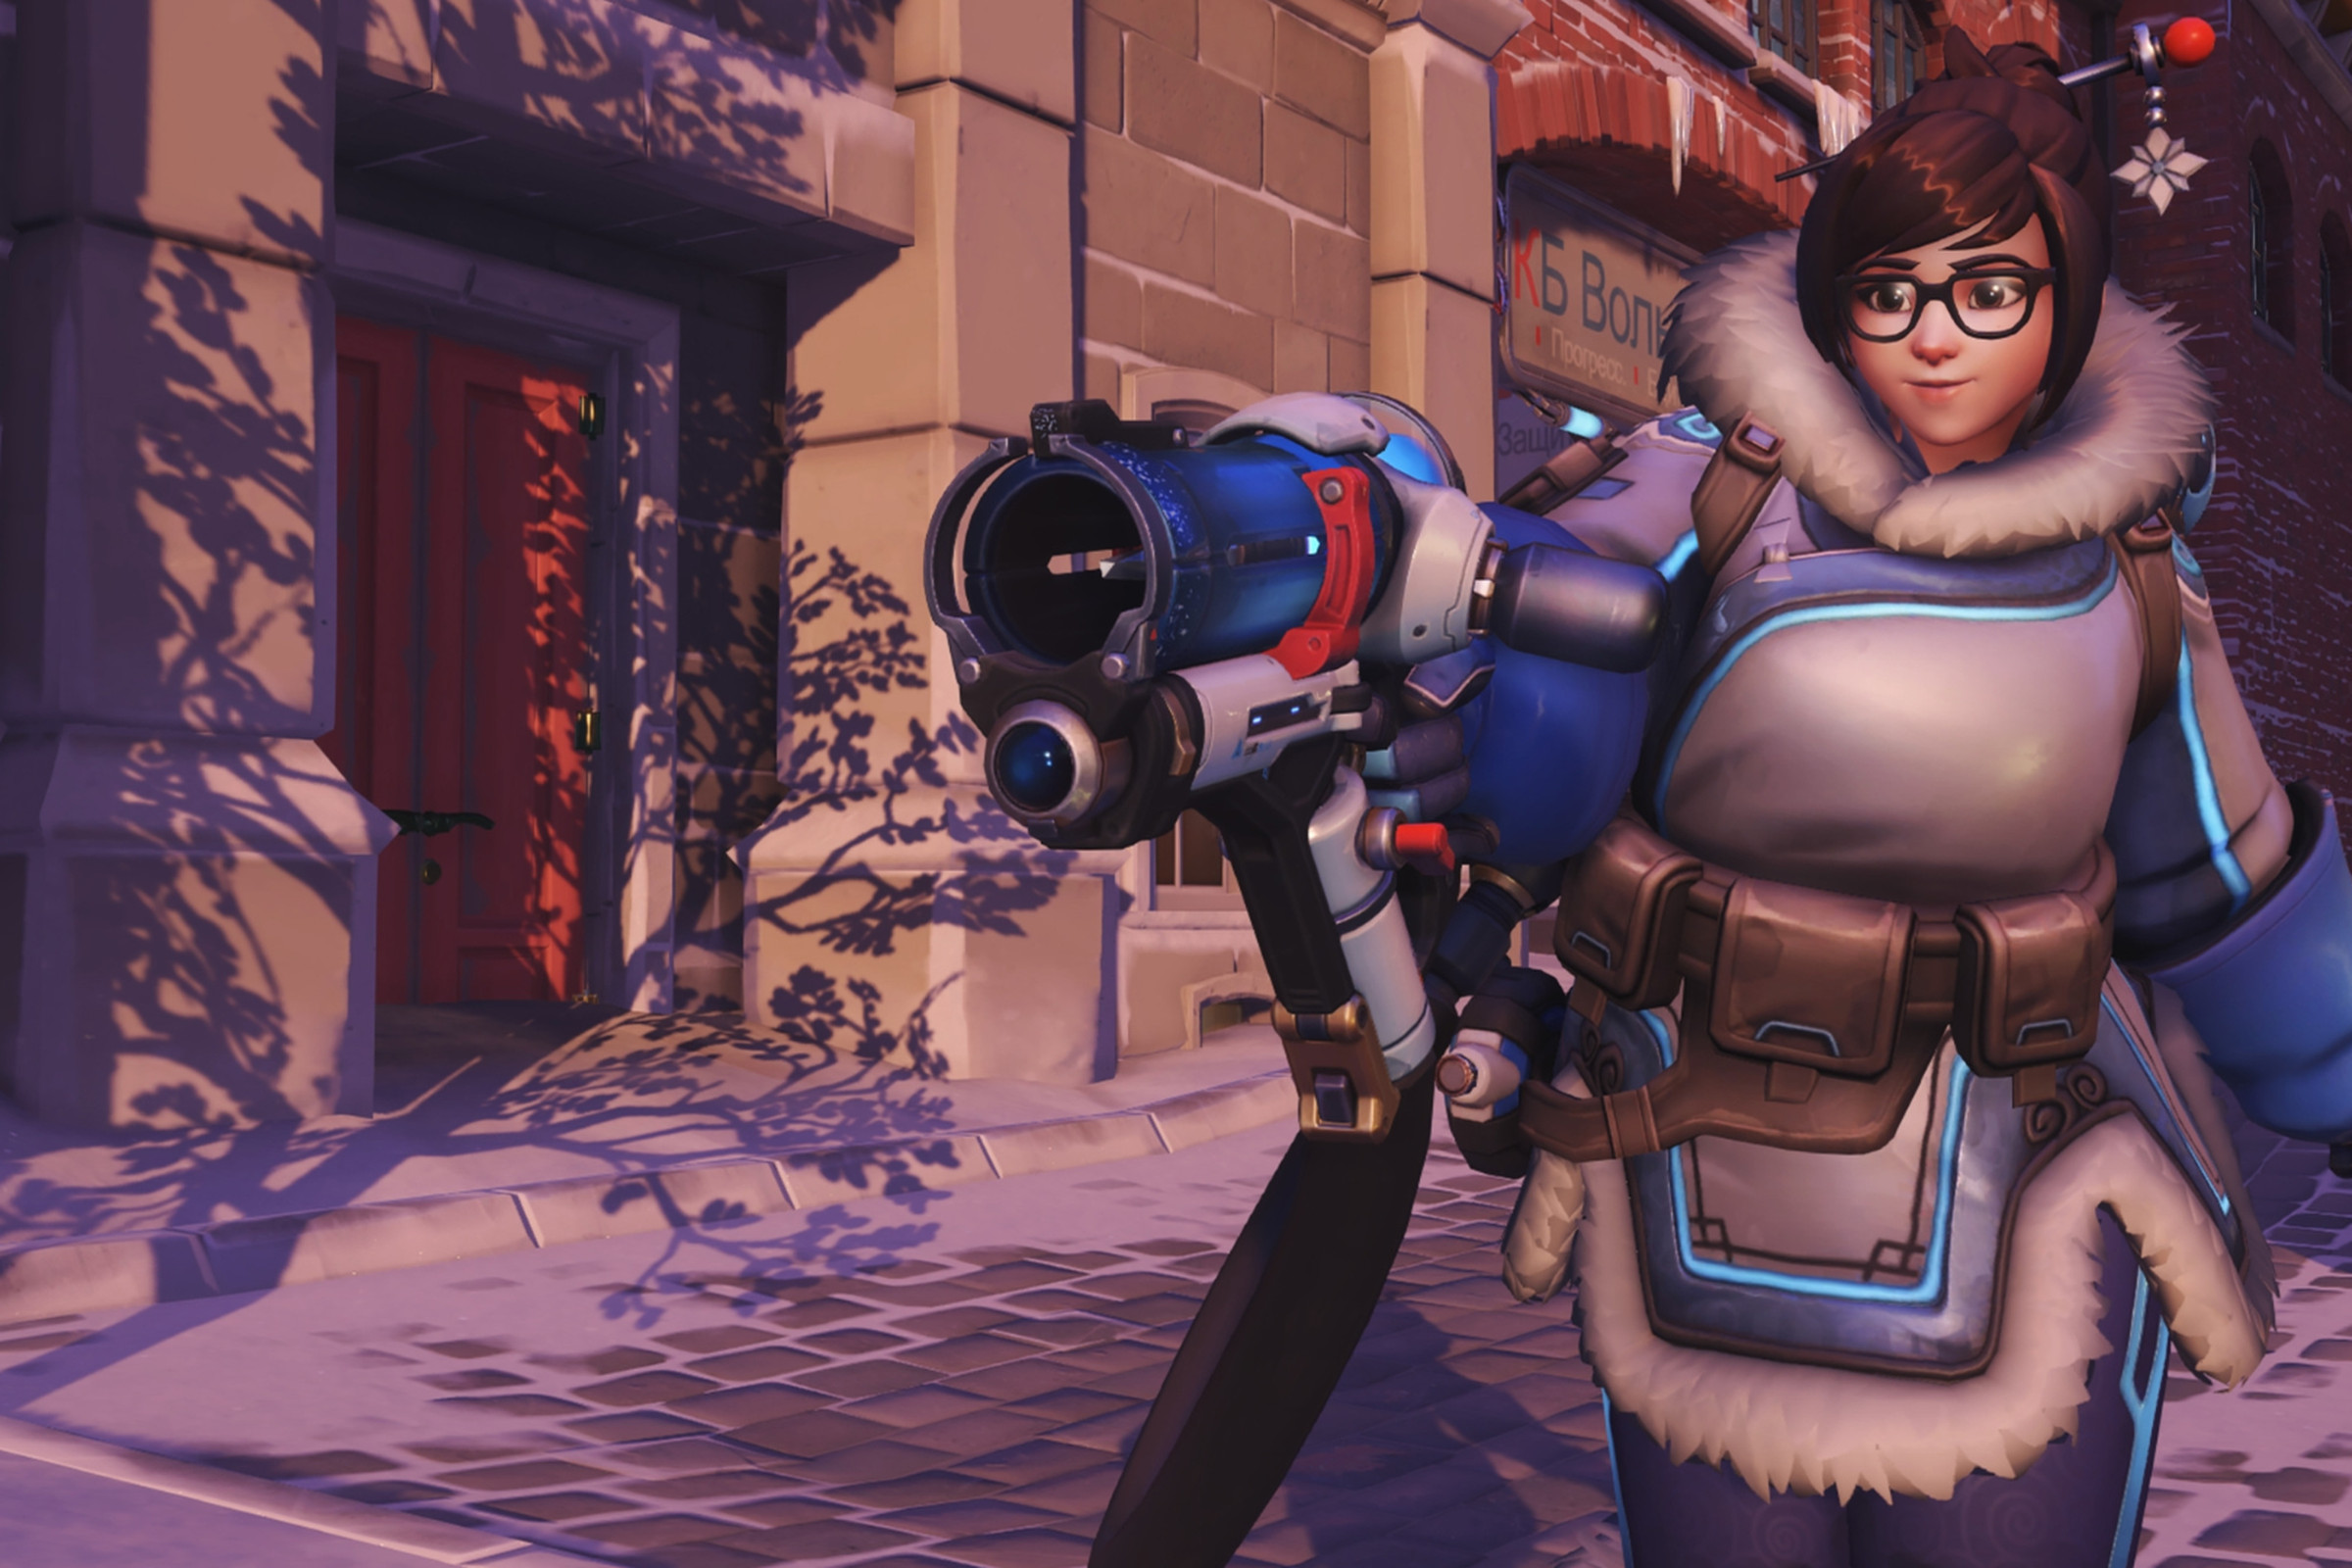 Screenshot from Overwatch featuring the heroine Mei, a medium height Chinese woman in a blue and white winter overcoat and brown hair with a snowflake hair pin sticking out